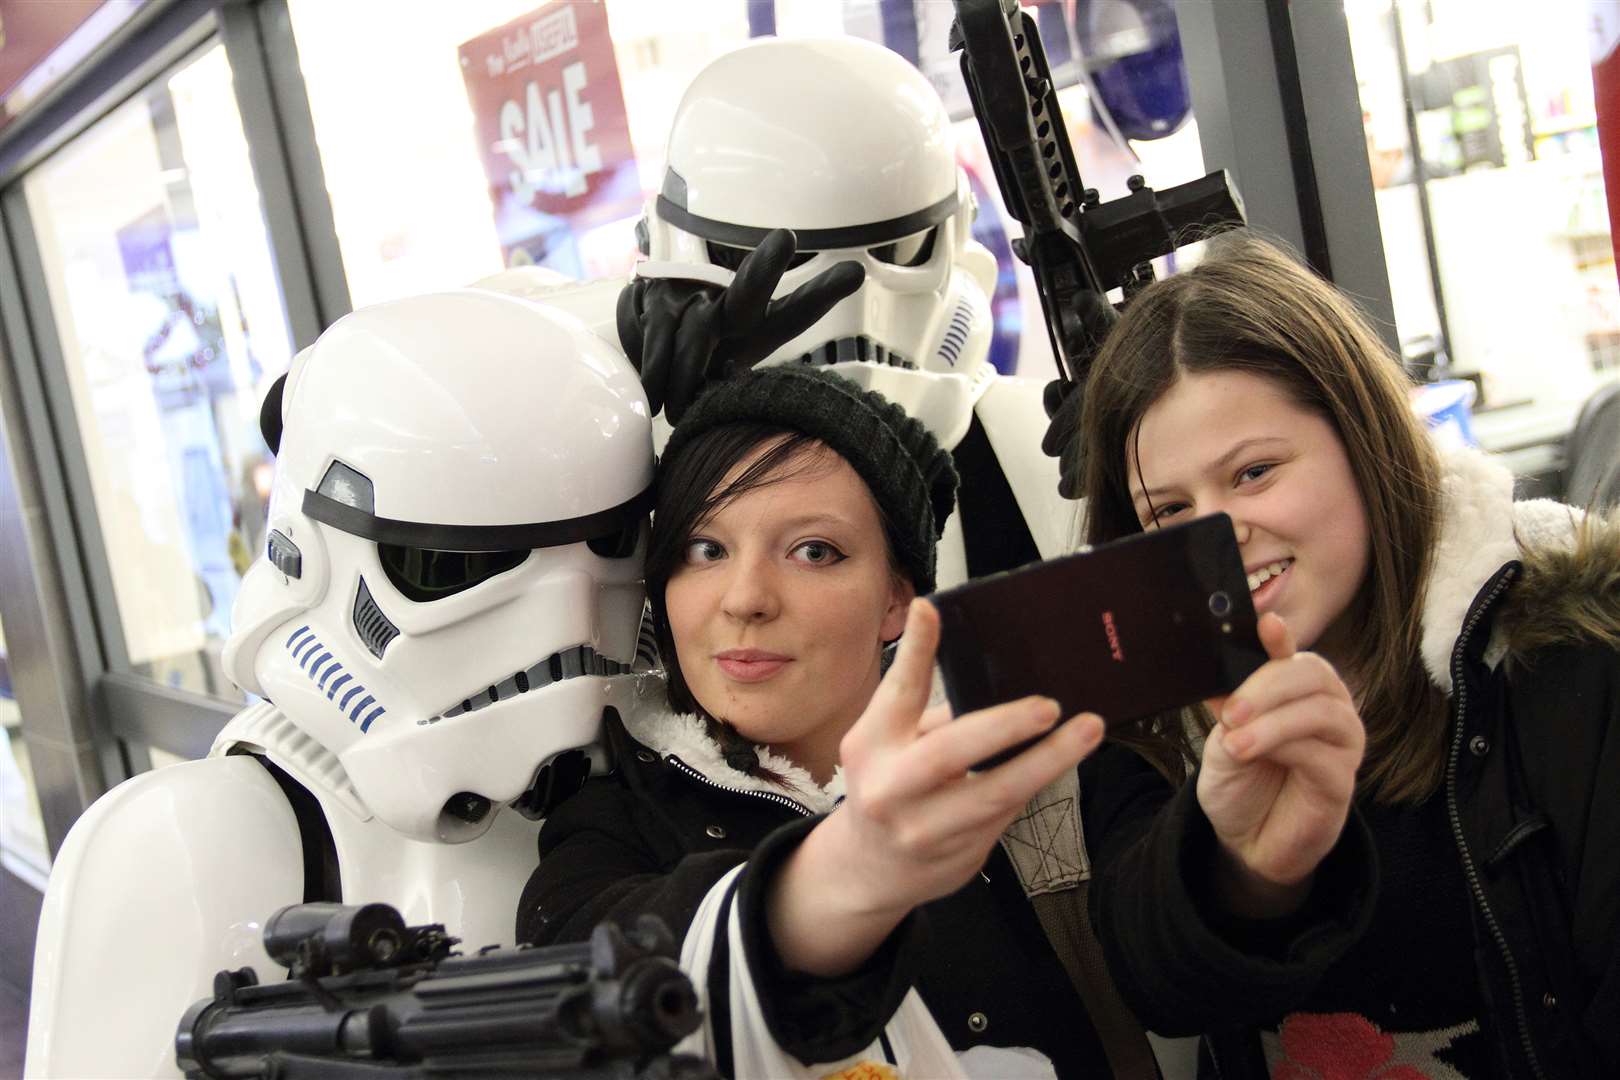 These two stormtroopers were certainly not all smiles when they photobombed a selfie